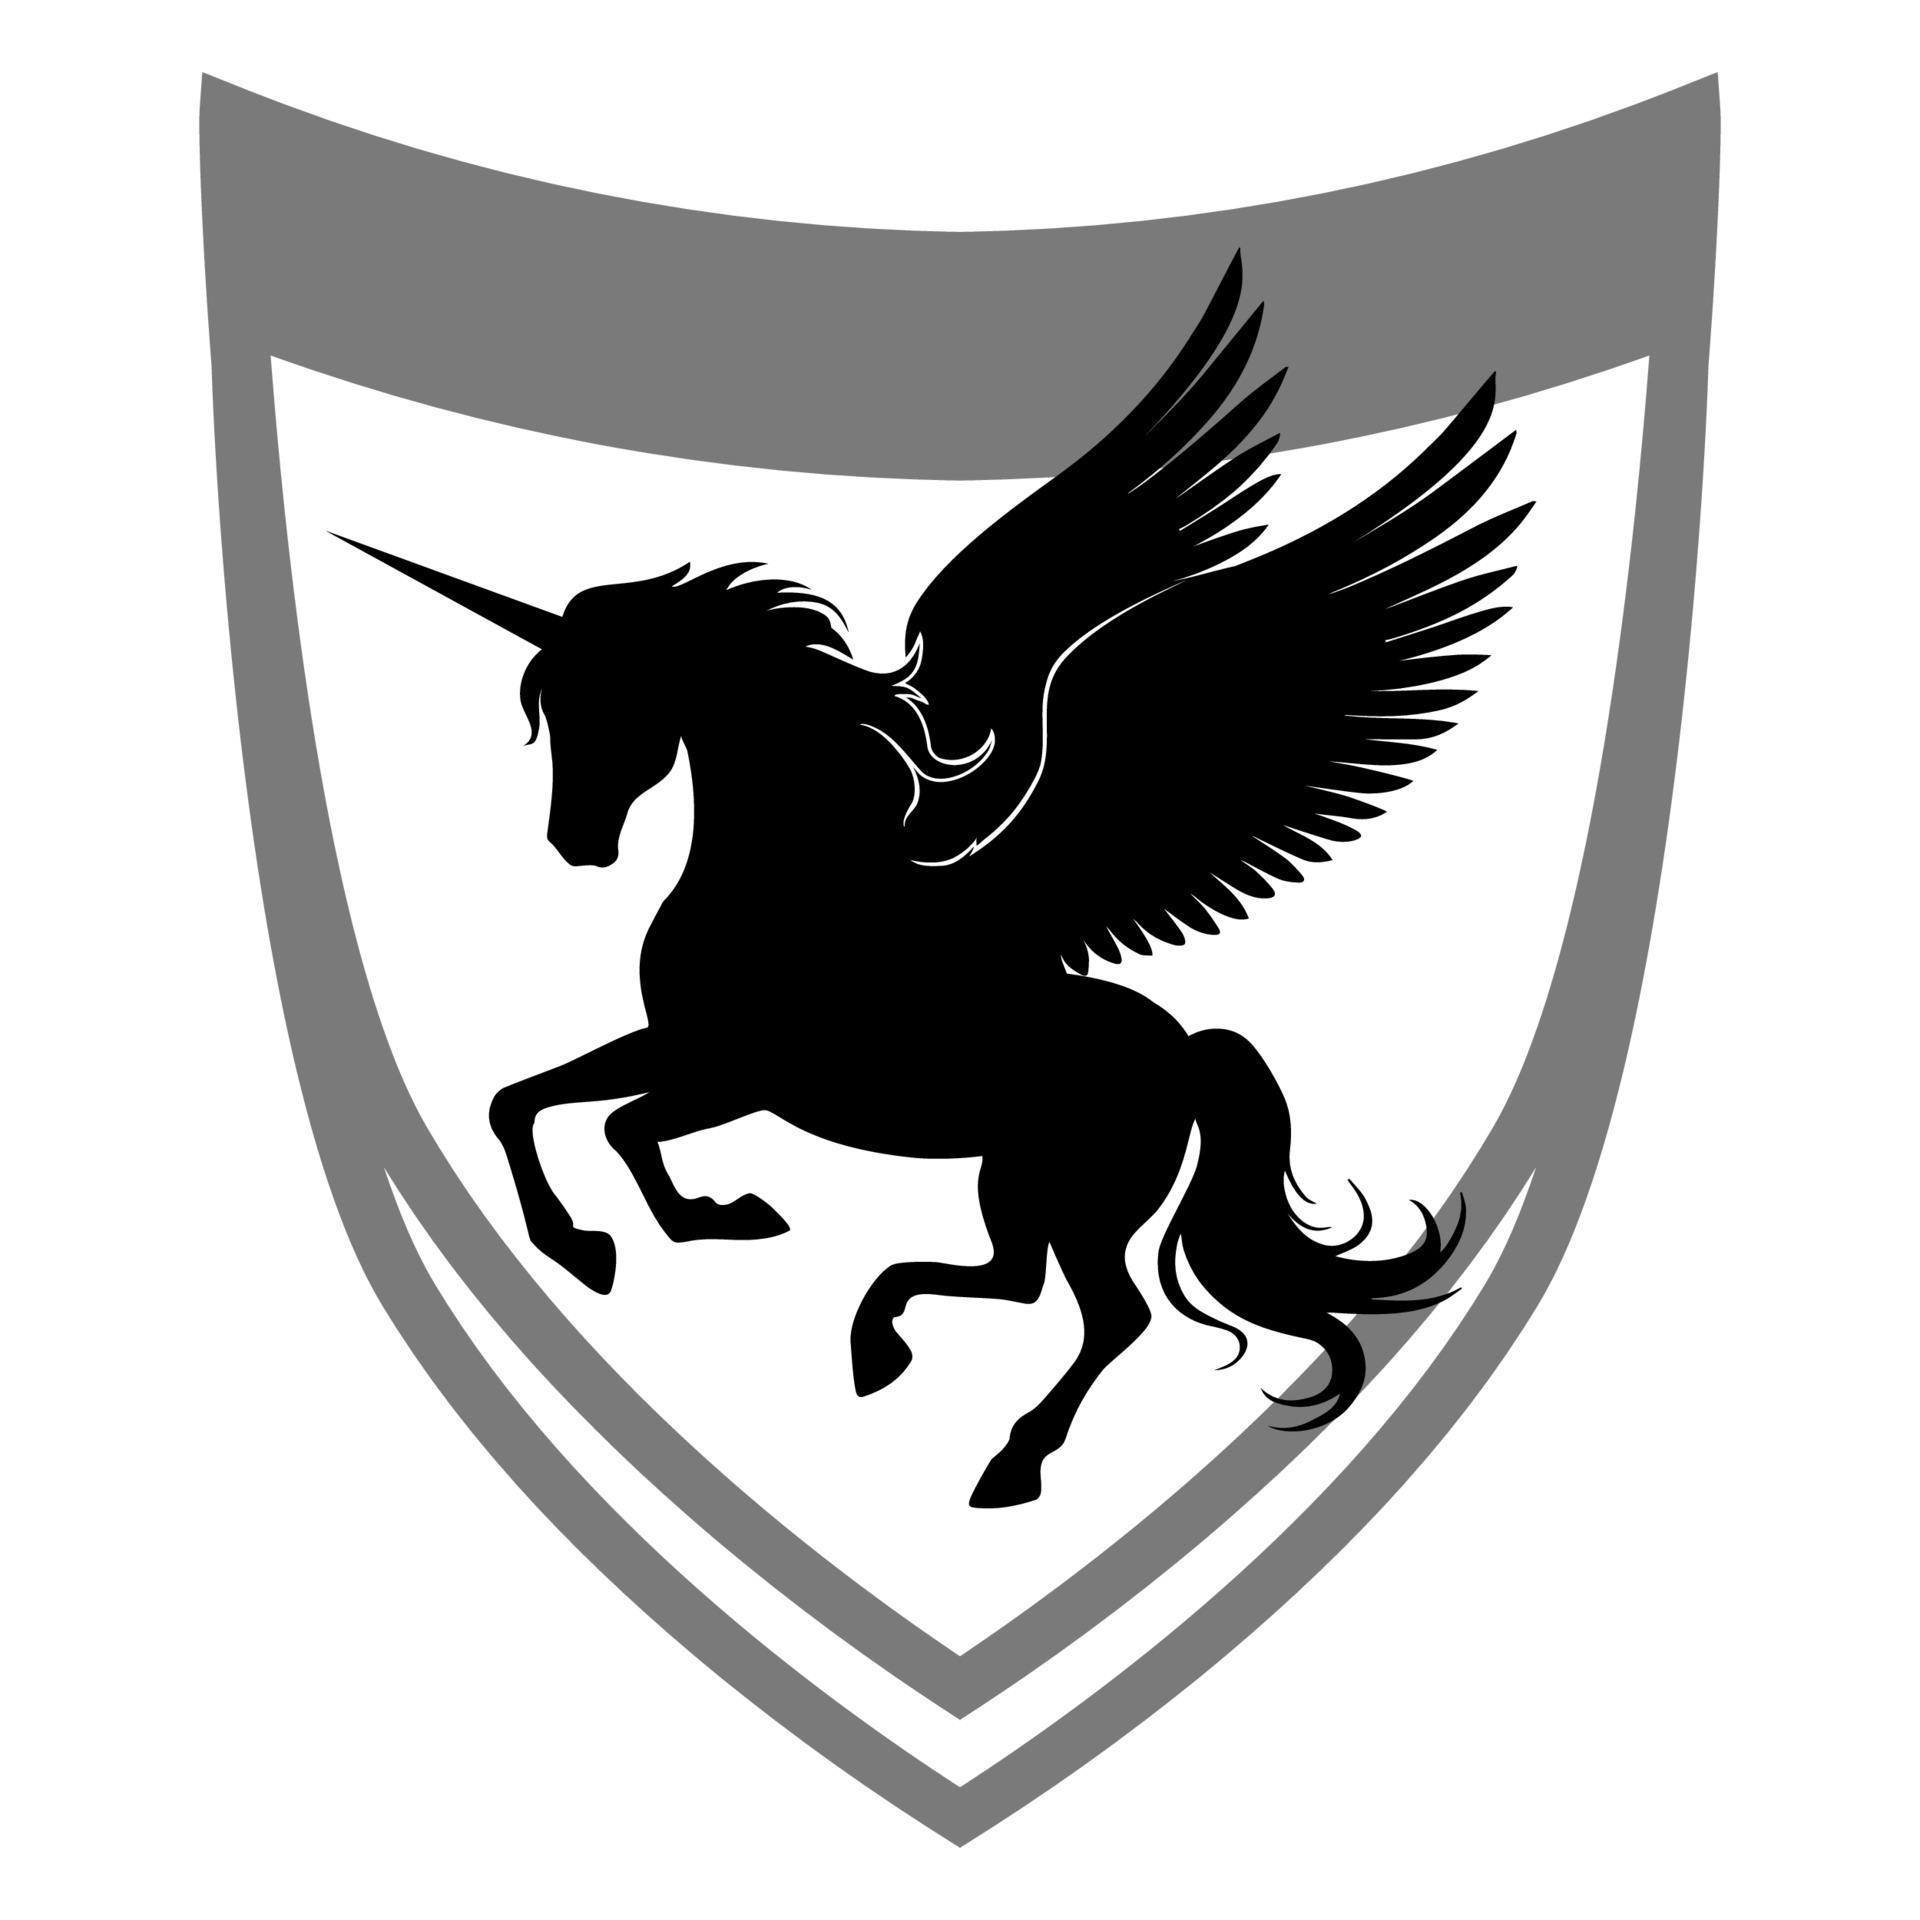 unicorn with wings silhouette